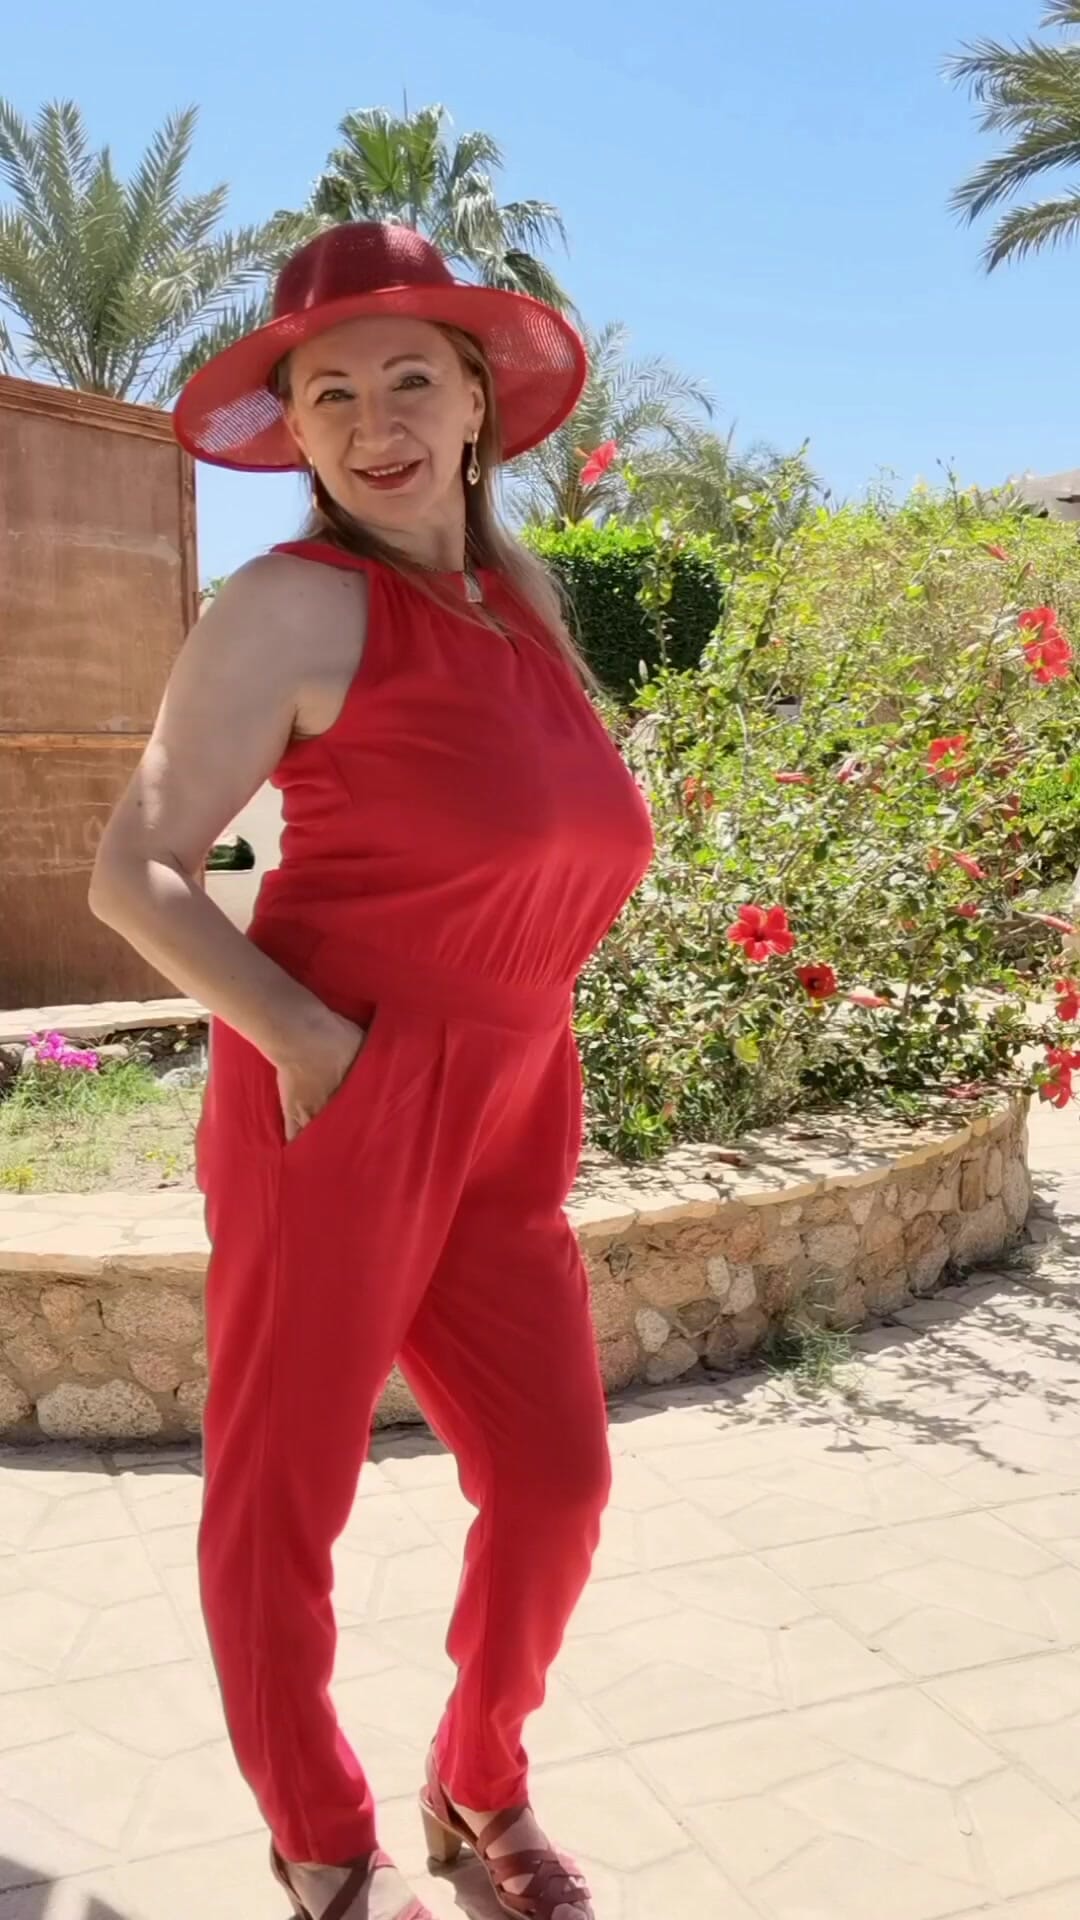 Lady in Red (Red Hat Granny)